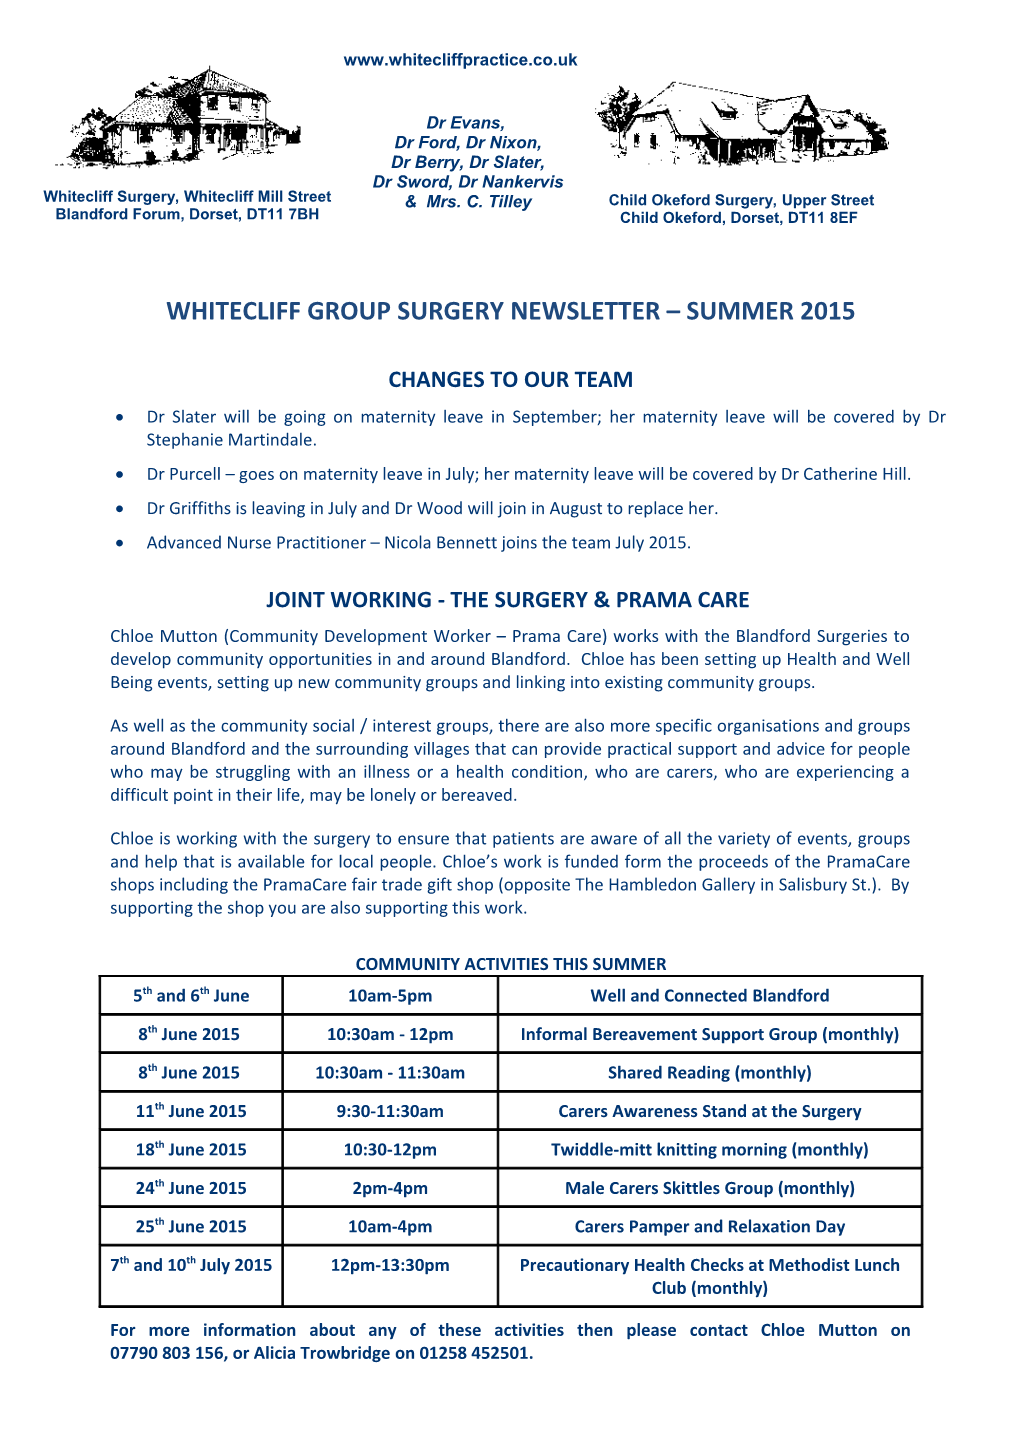 Whitecliff Group Surgery Staff Newsletter s1